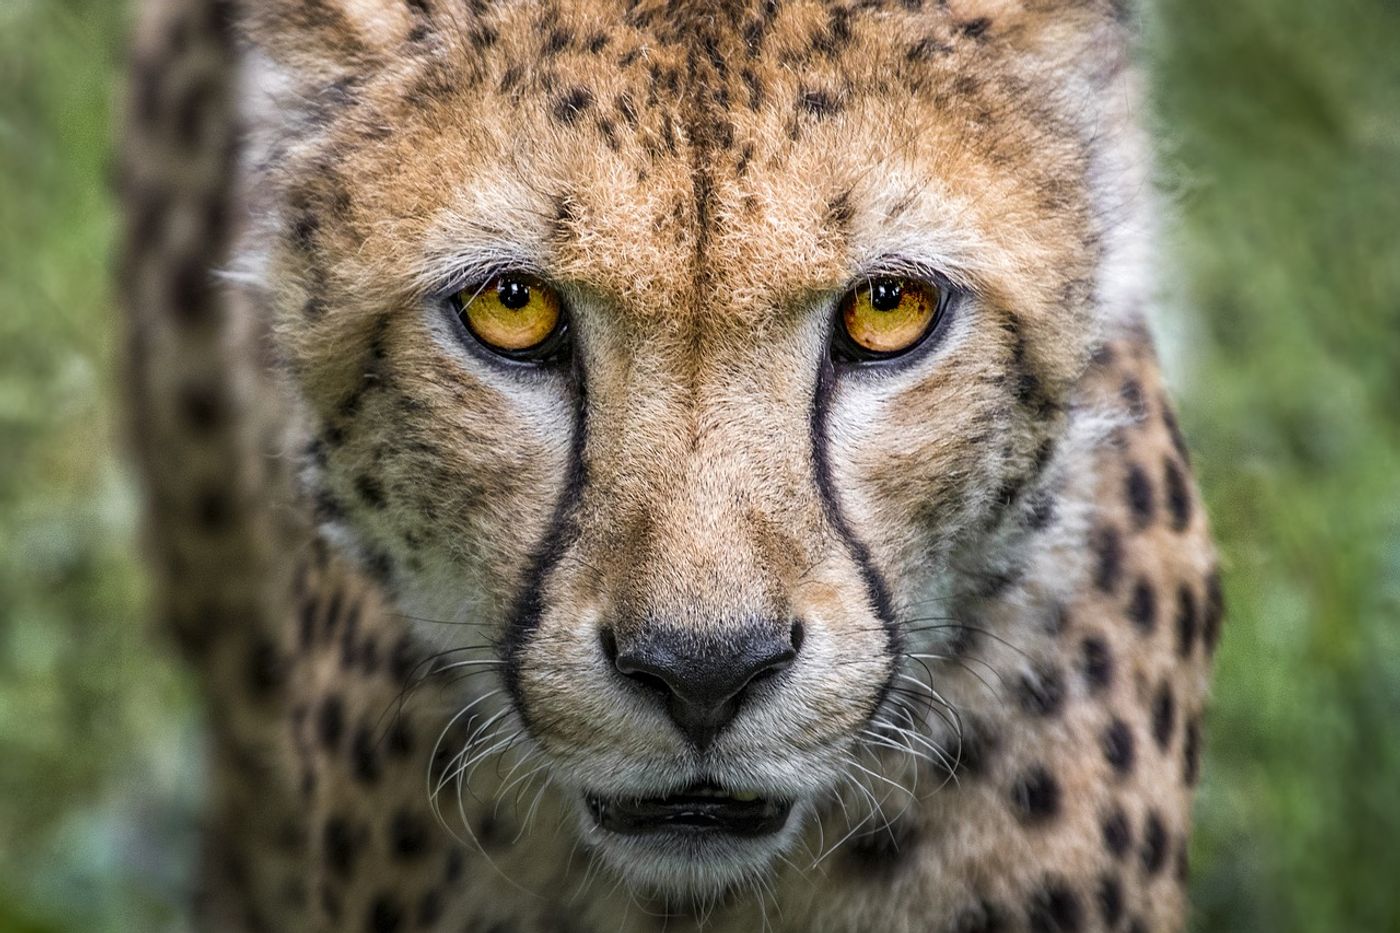 An in-depth analysis now suggests that cheetah populations could be 11% lower than the IUCN recognizes.